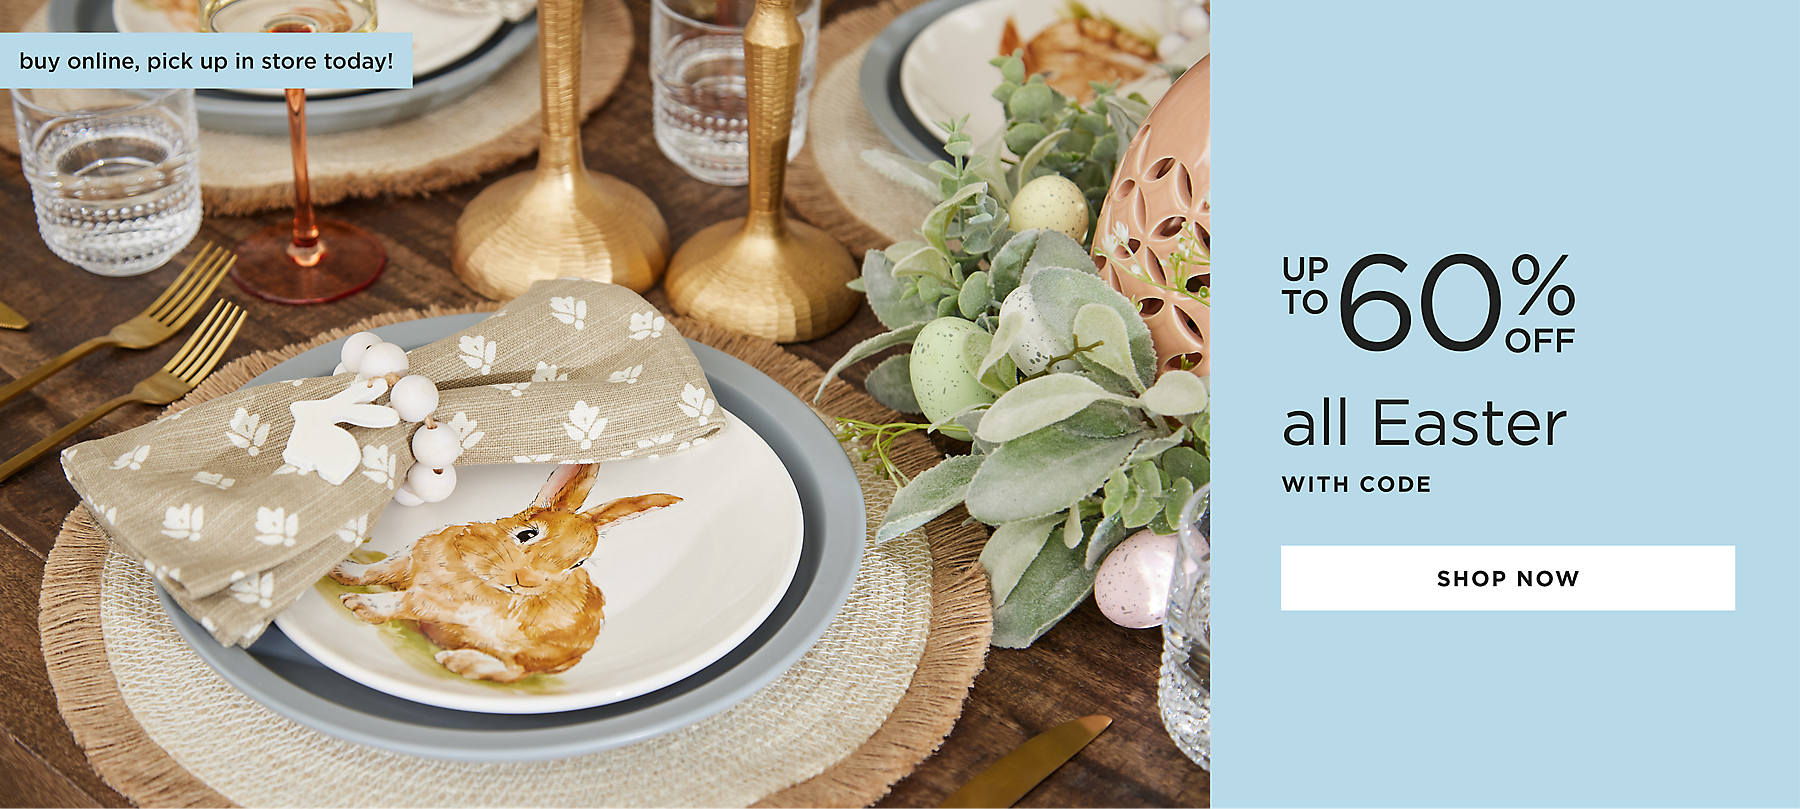 all Easter up to 60% off with code shop now buy online, pick up in store today!